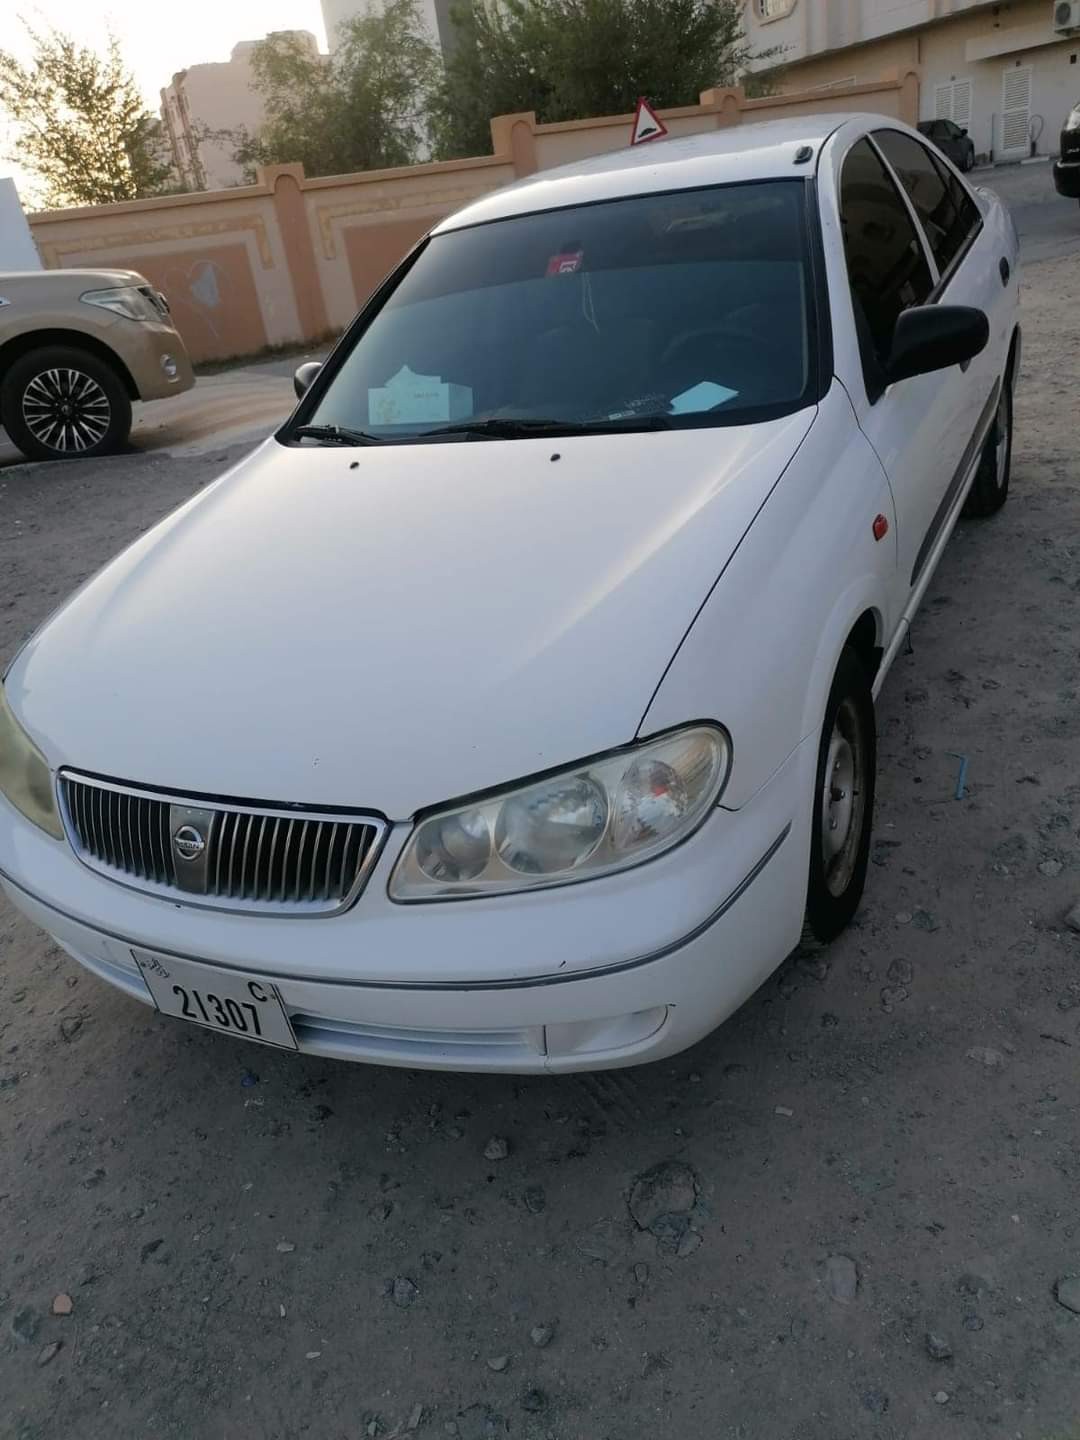 Score an Affordable Used Nissan Sunny from Japan